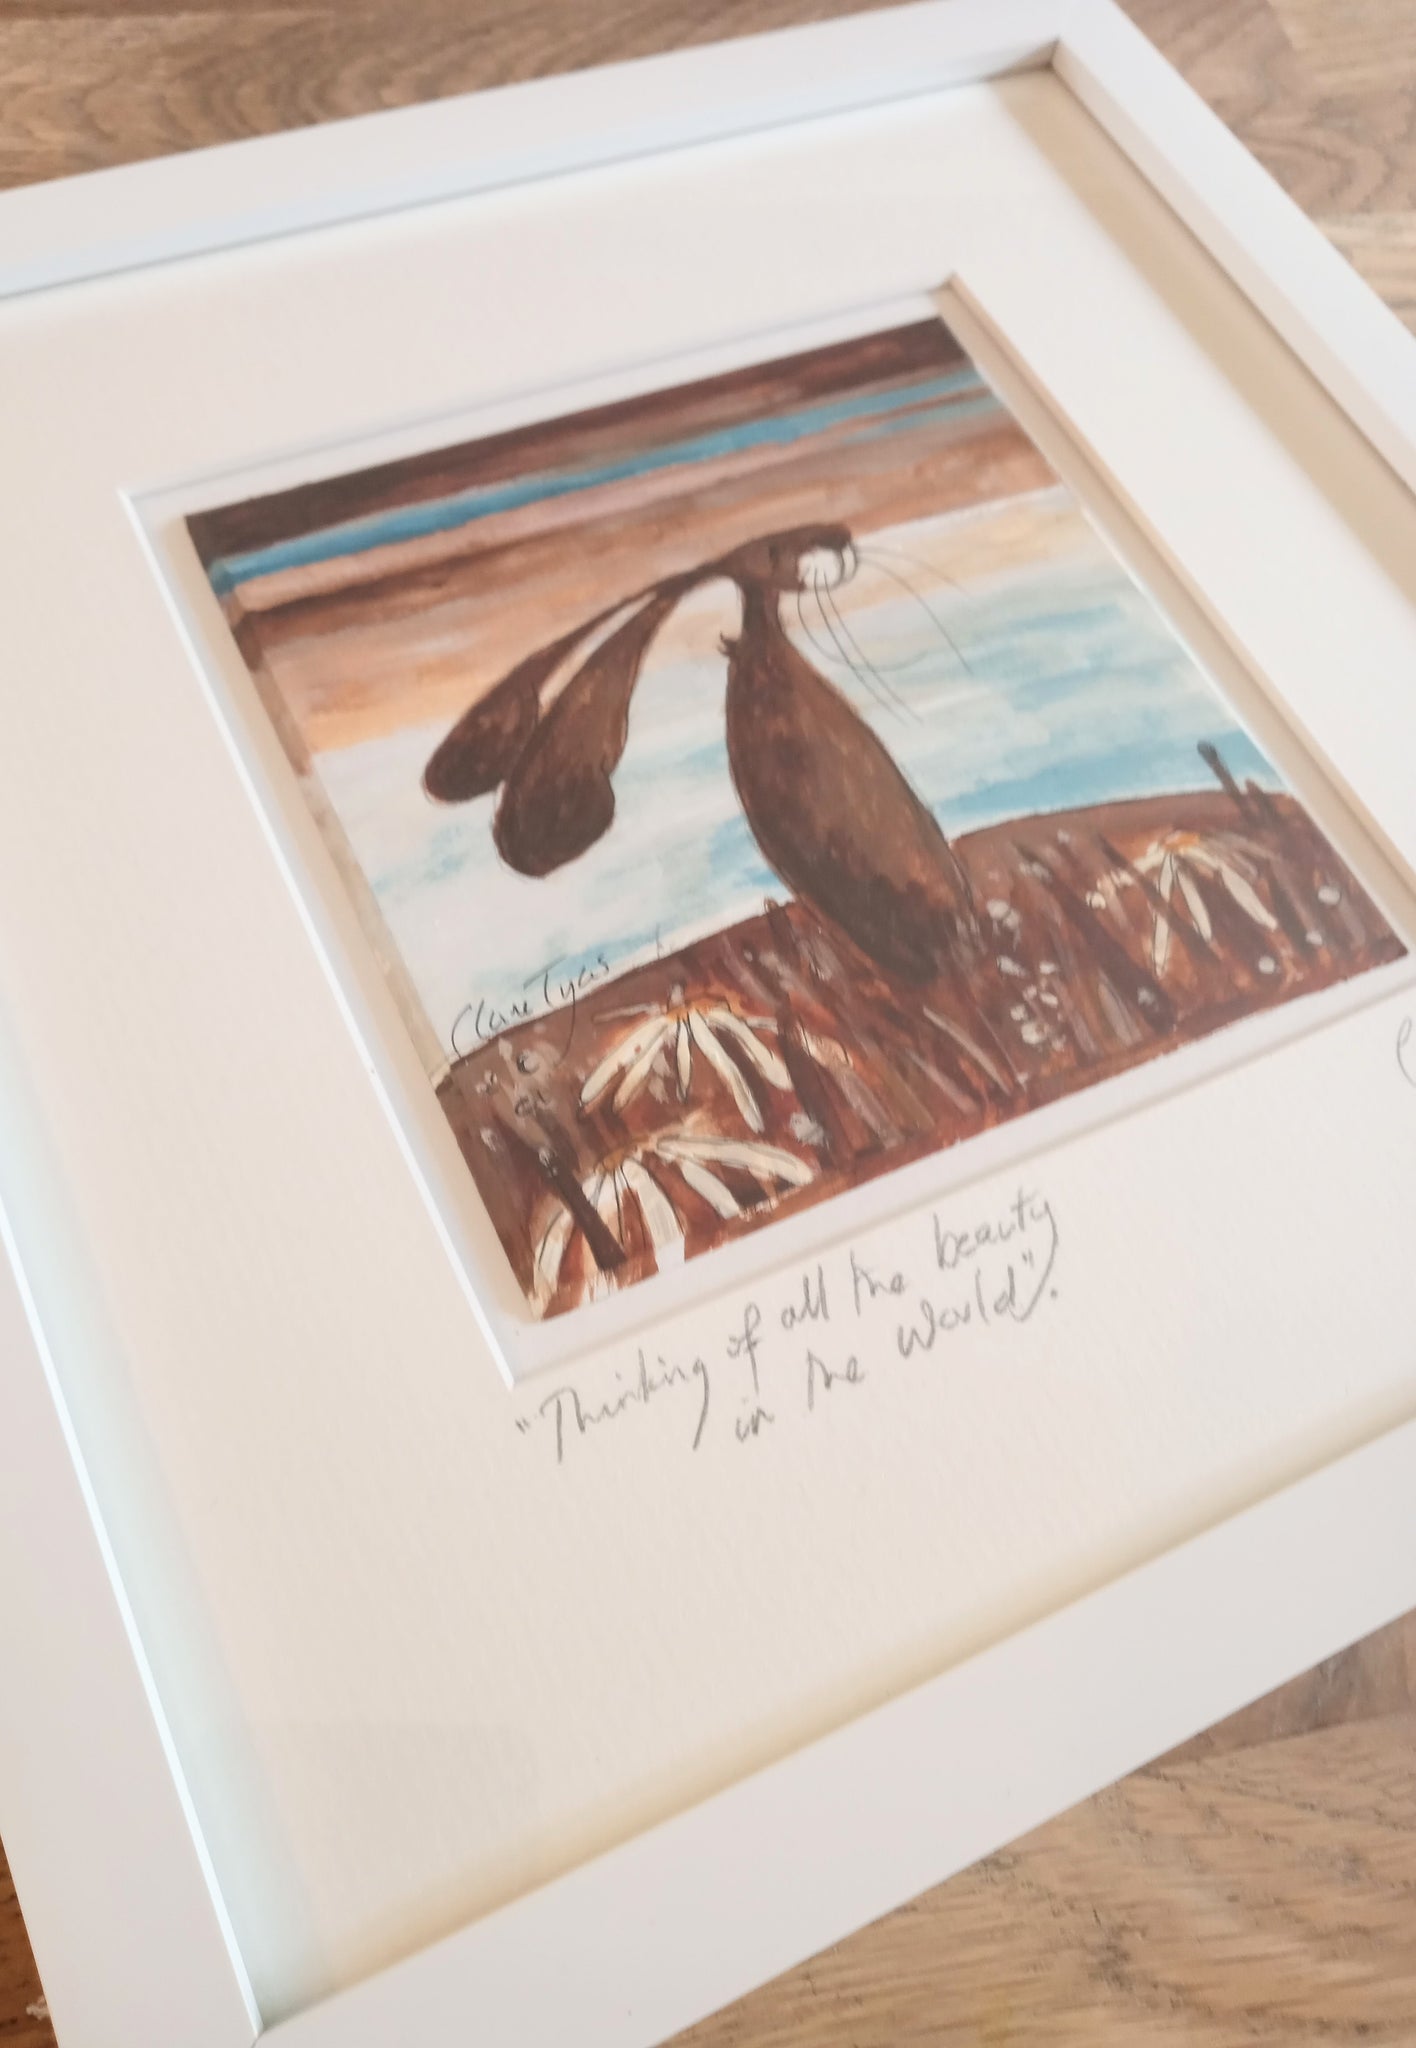 Thinking of all the beauty in the World. Original watercolour signed and framed.